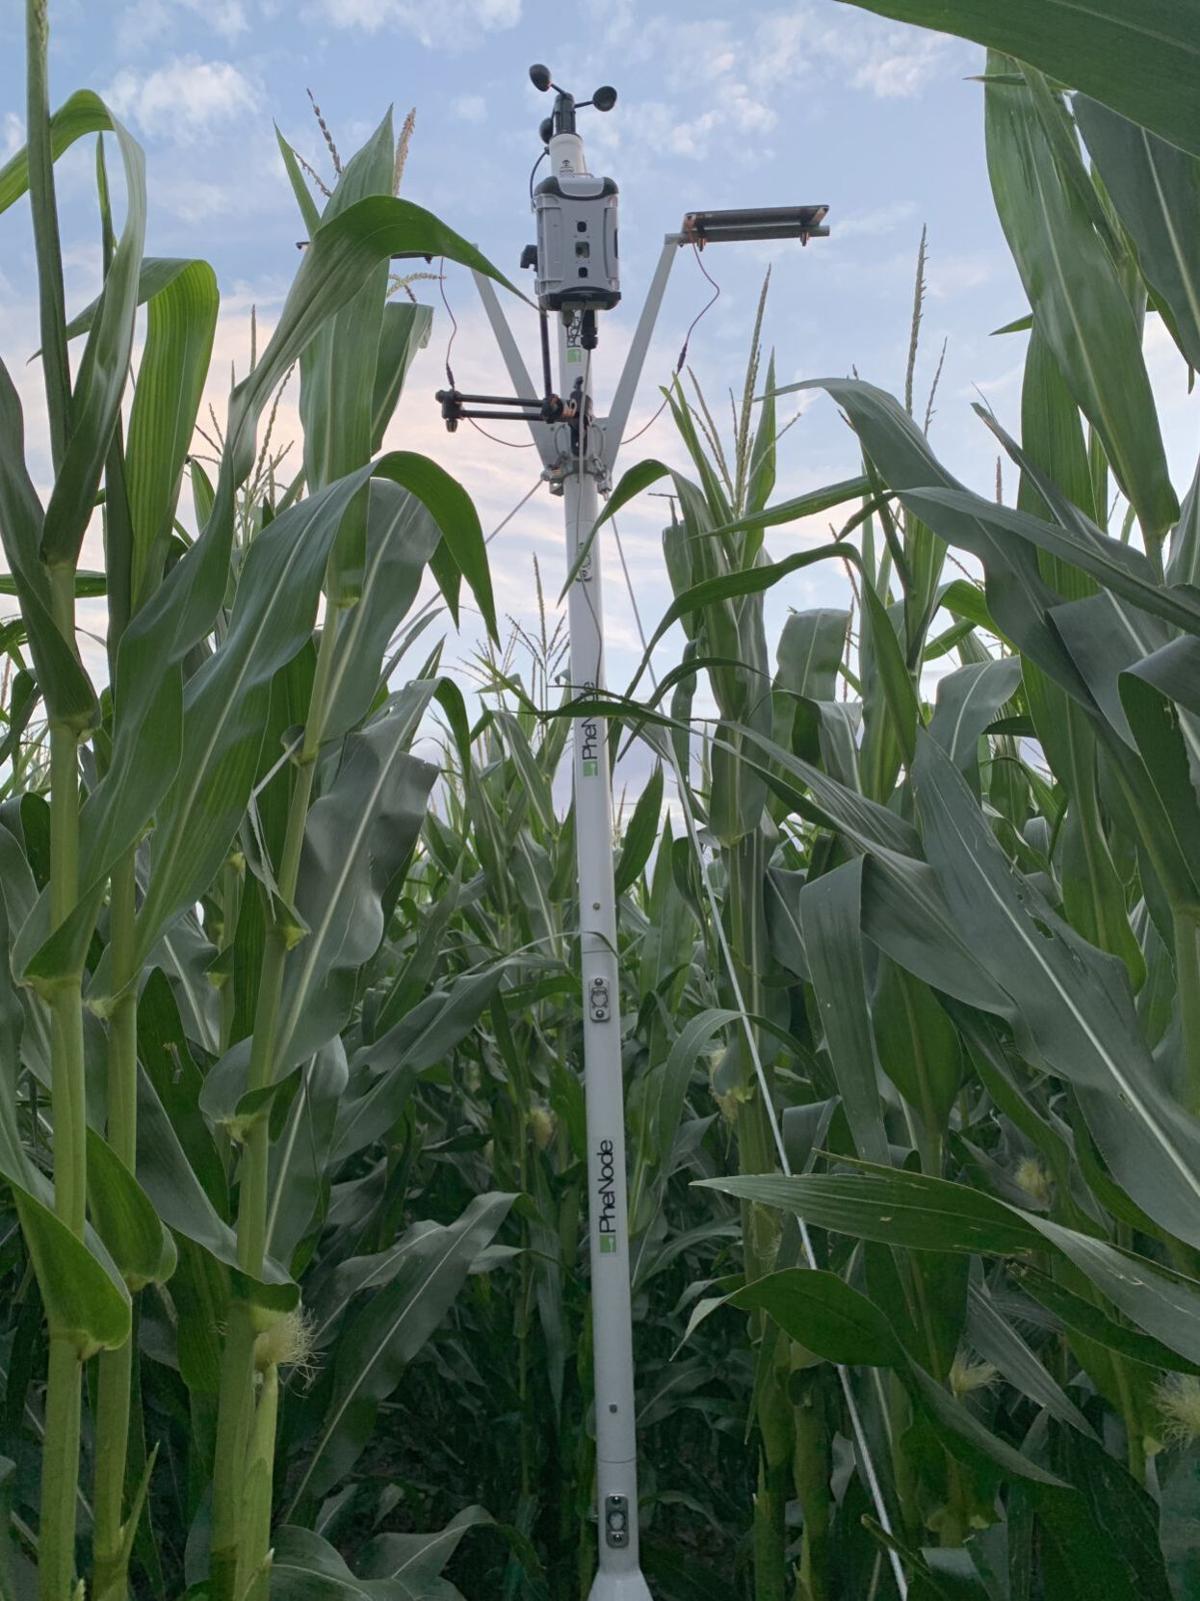 The FieldDock project helps scientists and farmers to breed and grow crops more efficiently